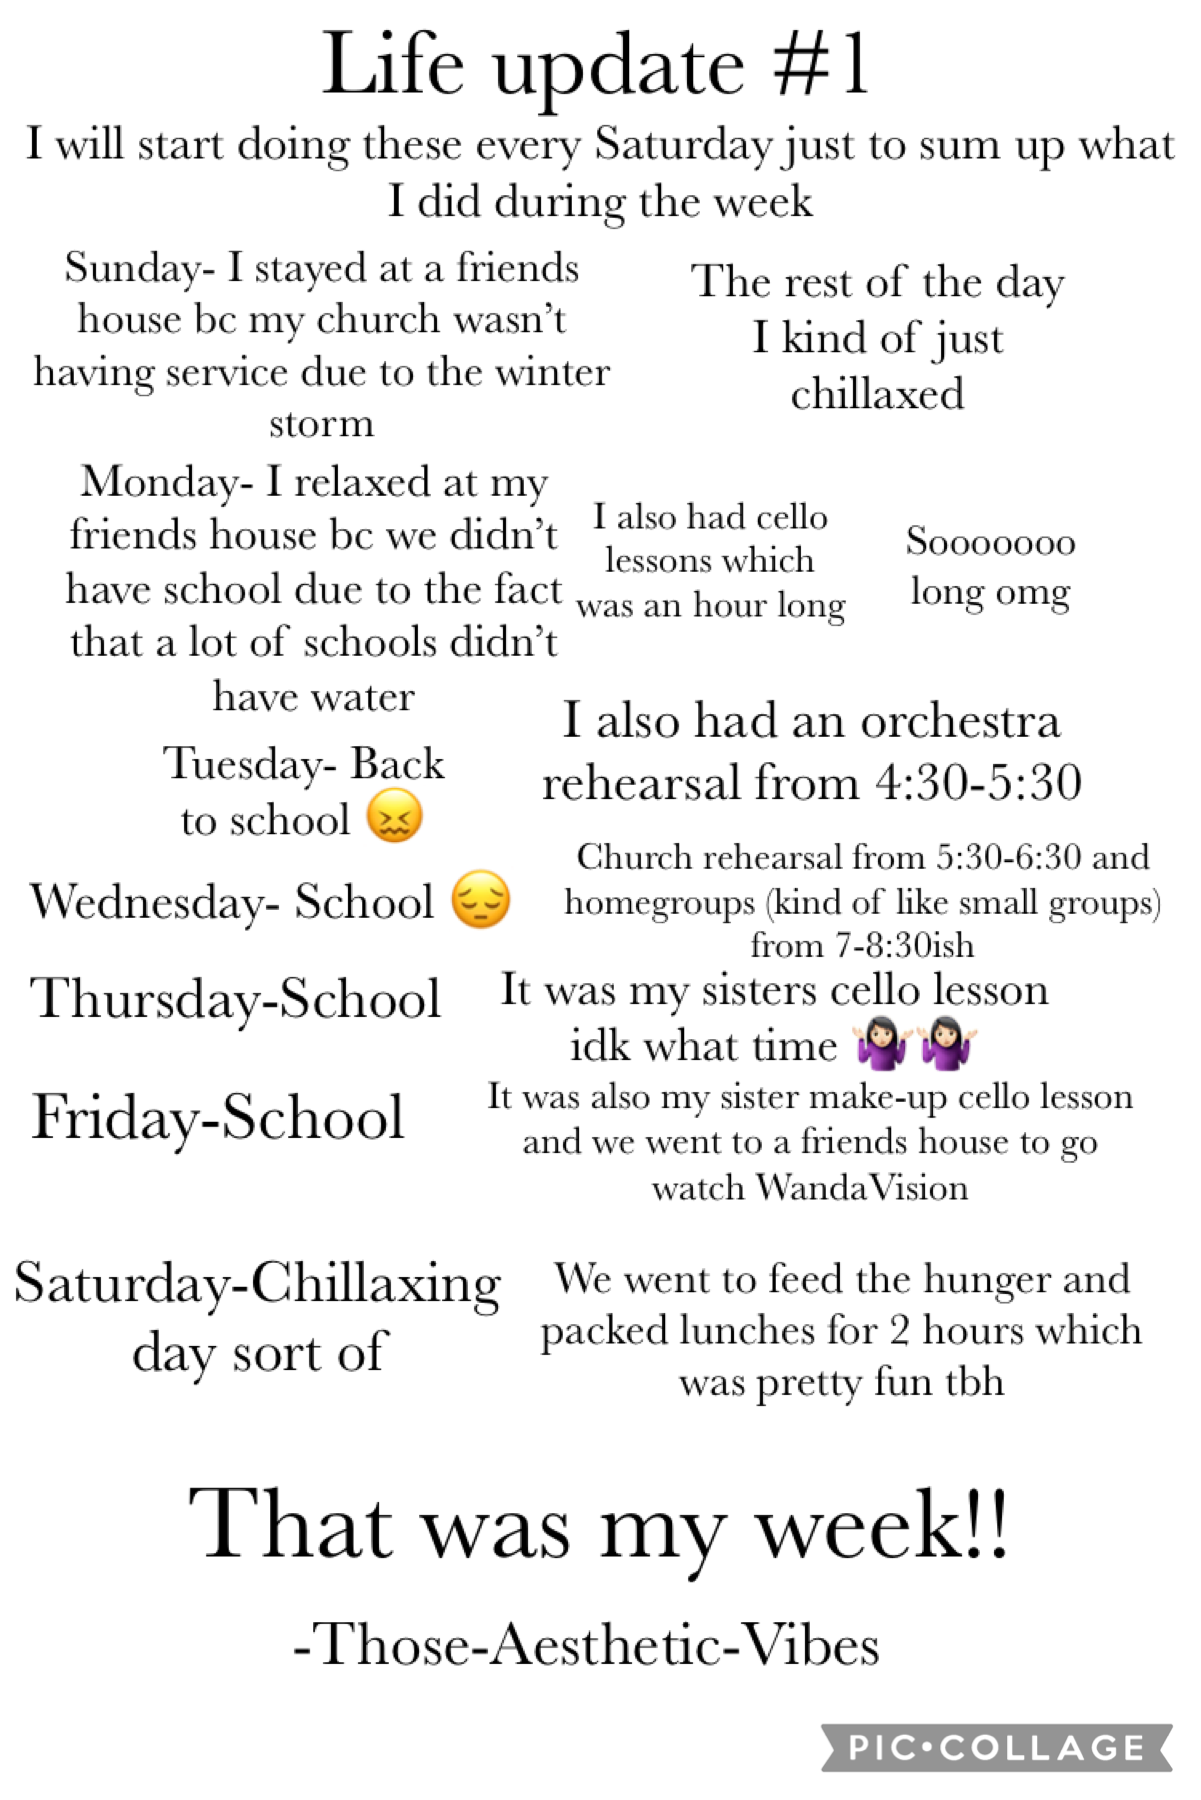 ☁️My life☁️
I meant to post it yesterday but 🤷🏻‍♀️ I kind of forgot 😅 Here’s what I did this week!! Hope y’all enjoy my hectic schedule 😂 Have a blessed day! 🤍🤍